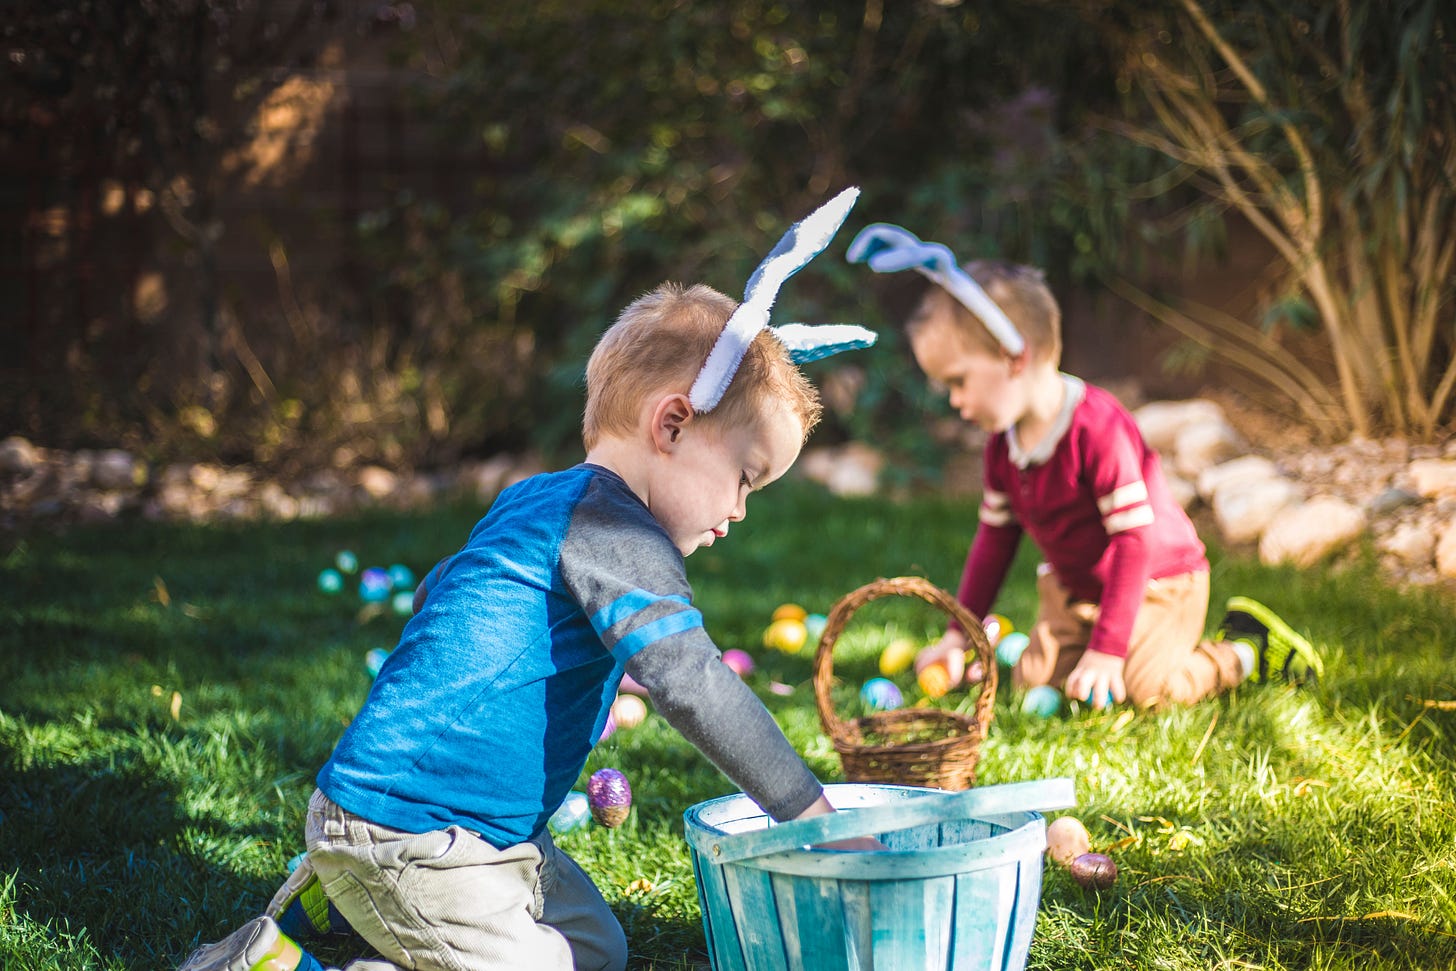 Easter Empowerment and Egg-citing Adventures for Kids